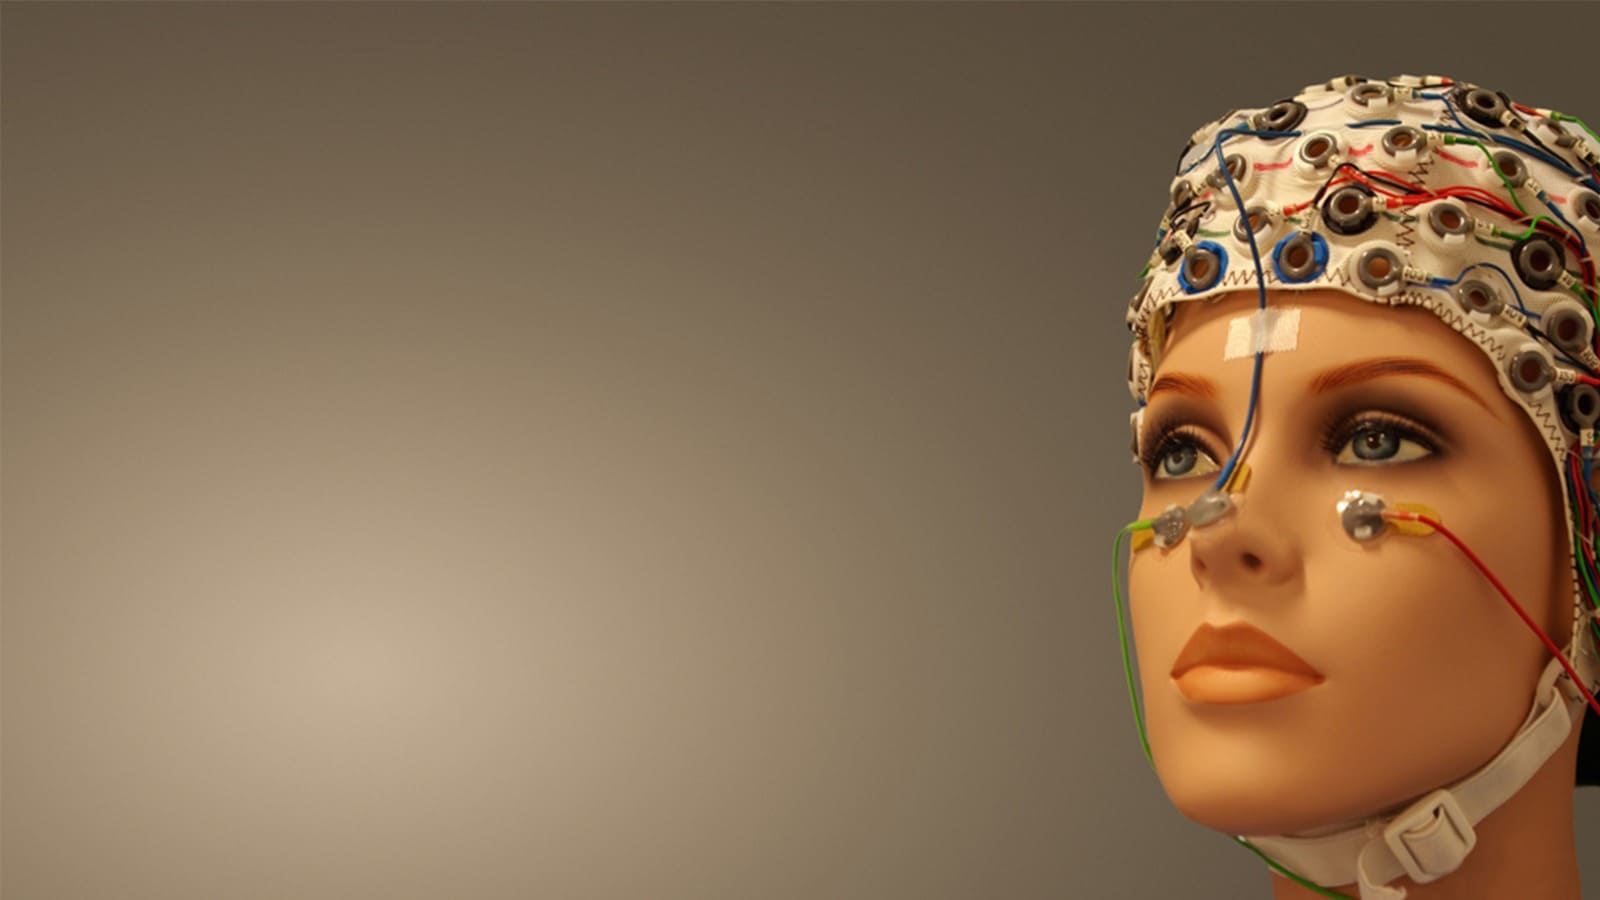 Mannequin with hat for EEG